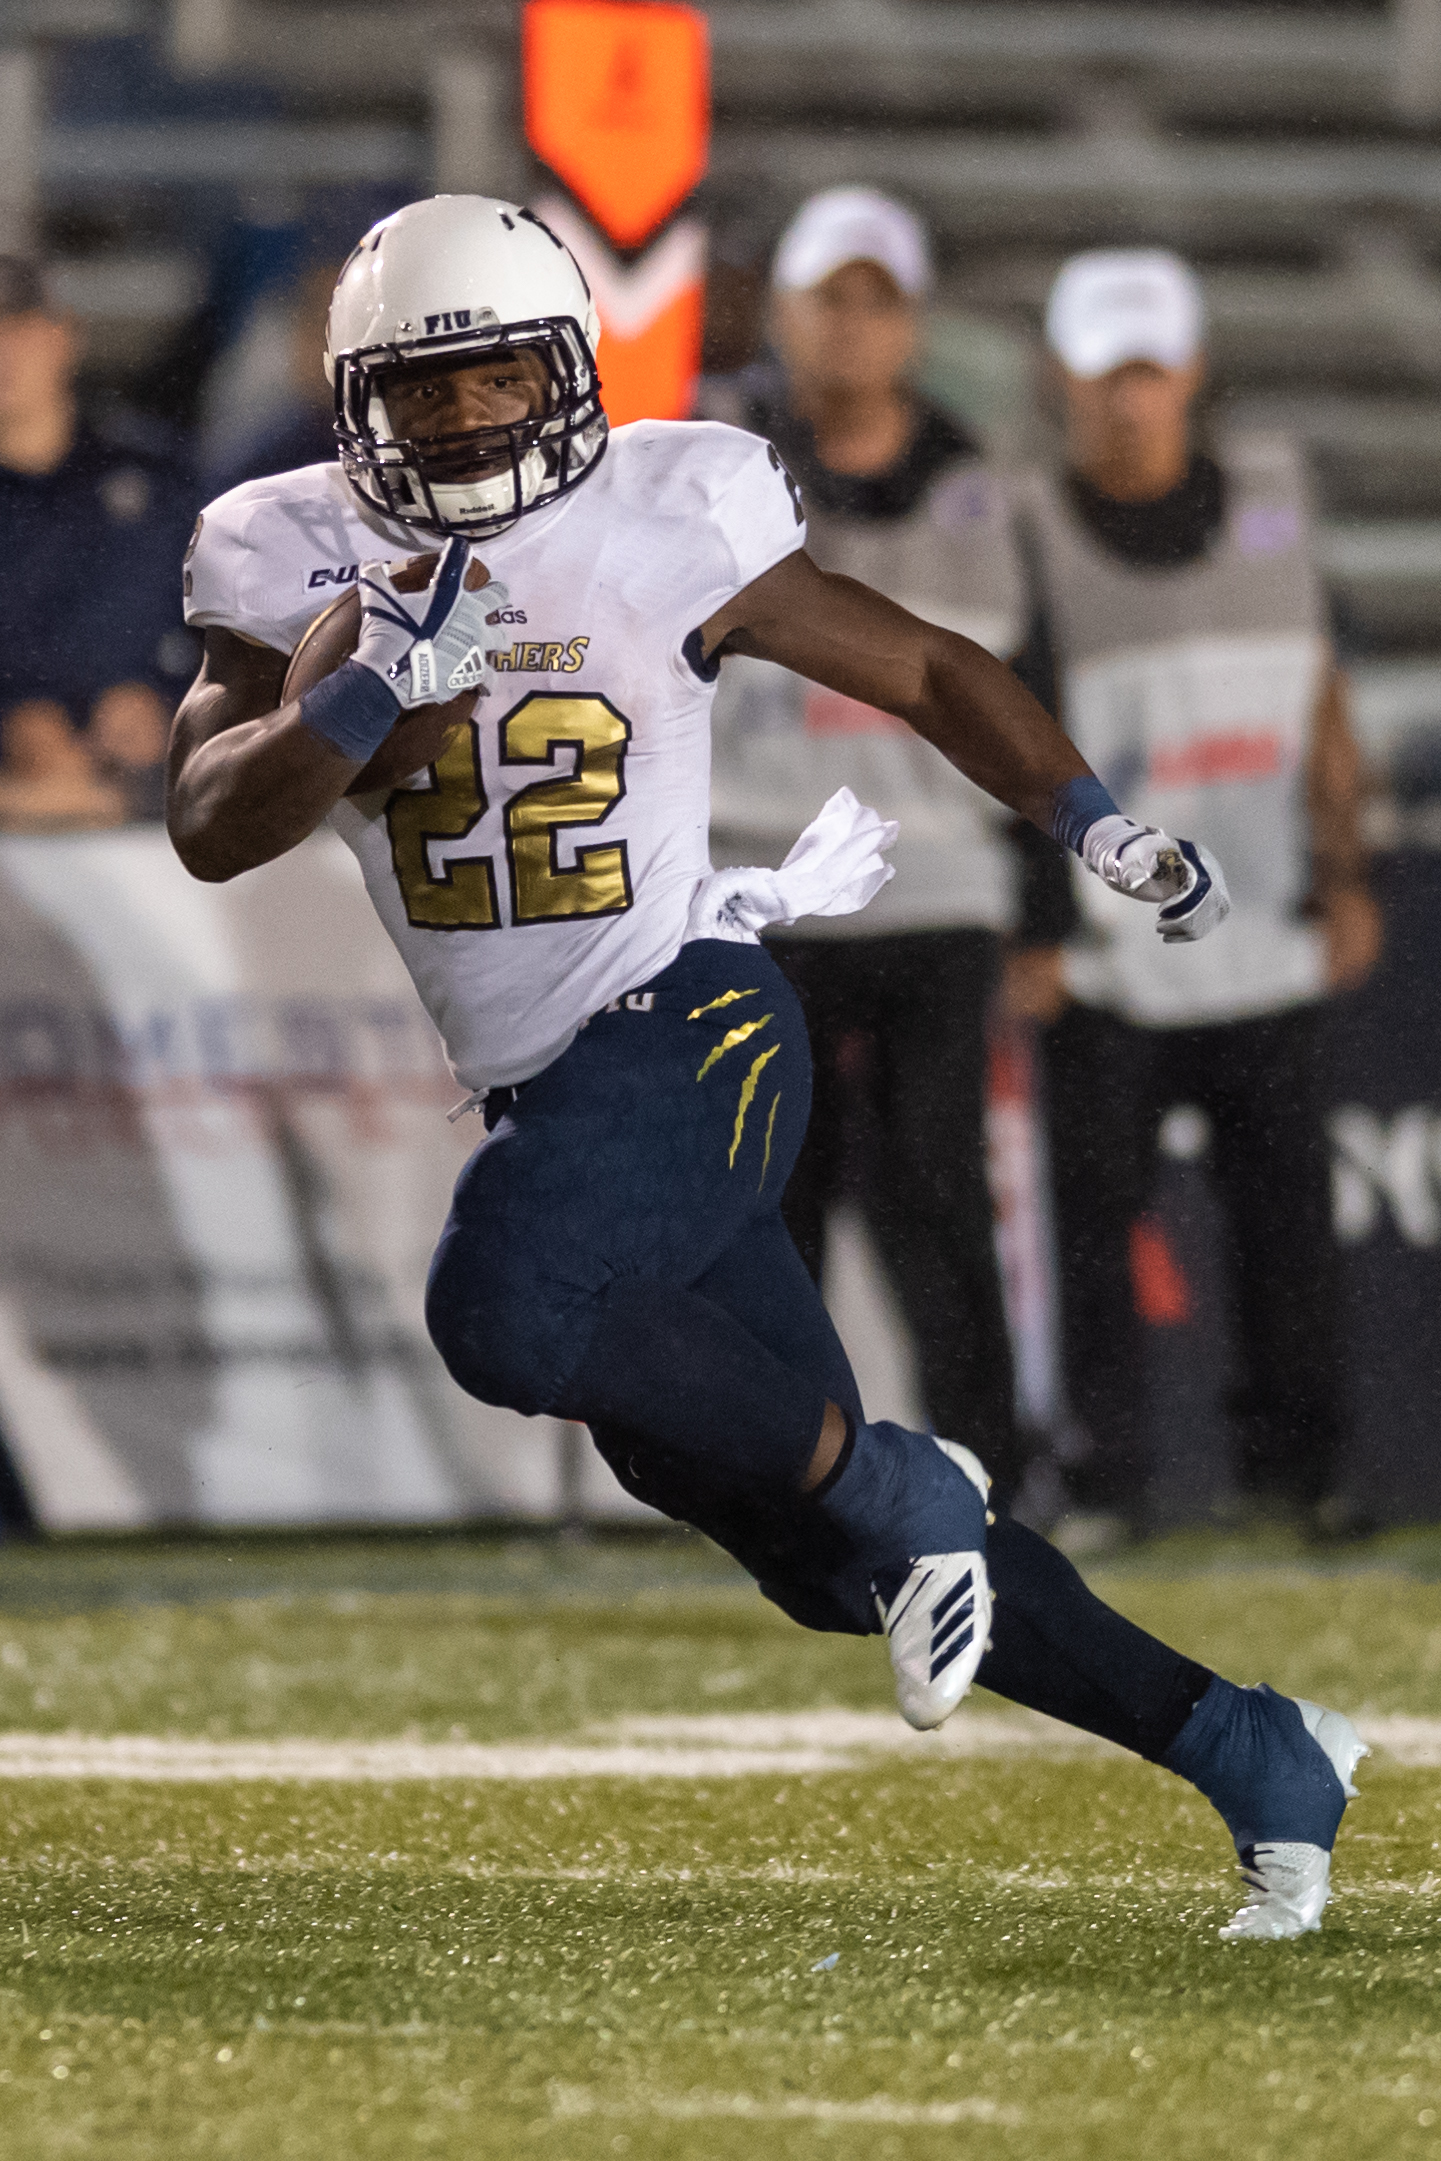  FIU Panthers running back Shawndarrius Phillips (22) runs for 33 yards against the Old Dominion Monarchs during the Saturday, Sept. 8, 2018 game held at Old Dominion University in Norfolk, Virginia. FIU defeated Old Dominion 28 to 20. 